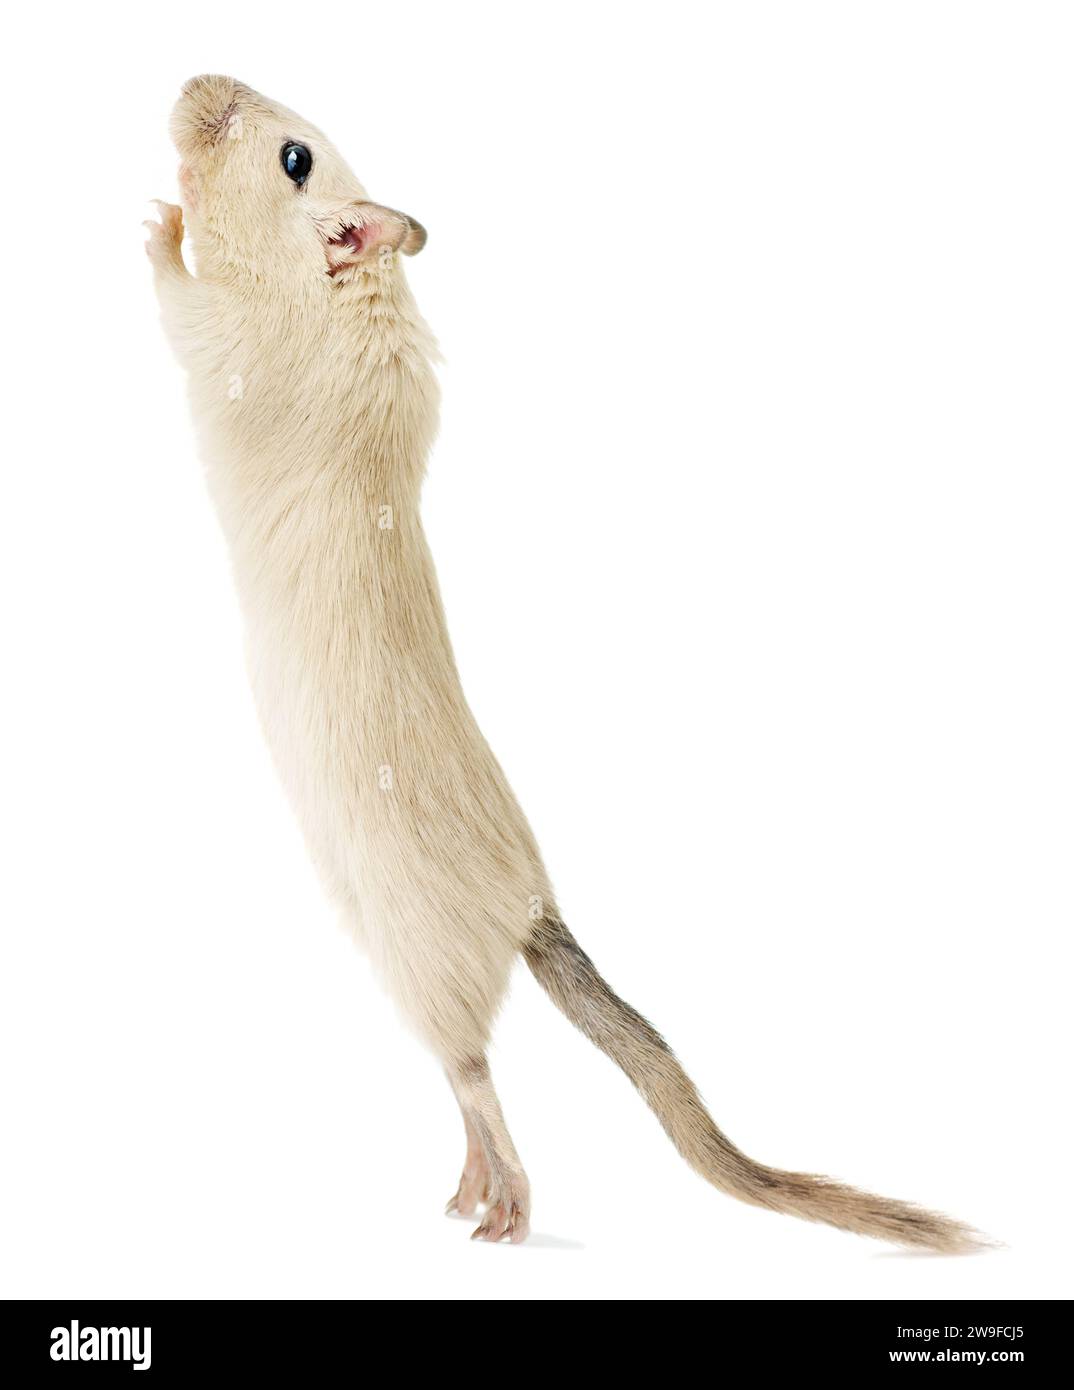 A playful beige gerbil pet standing on its hind legs, looking up isolated on white background Stock Photo